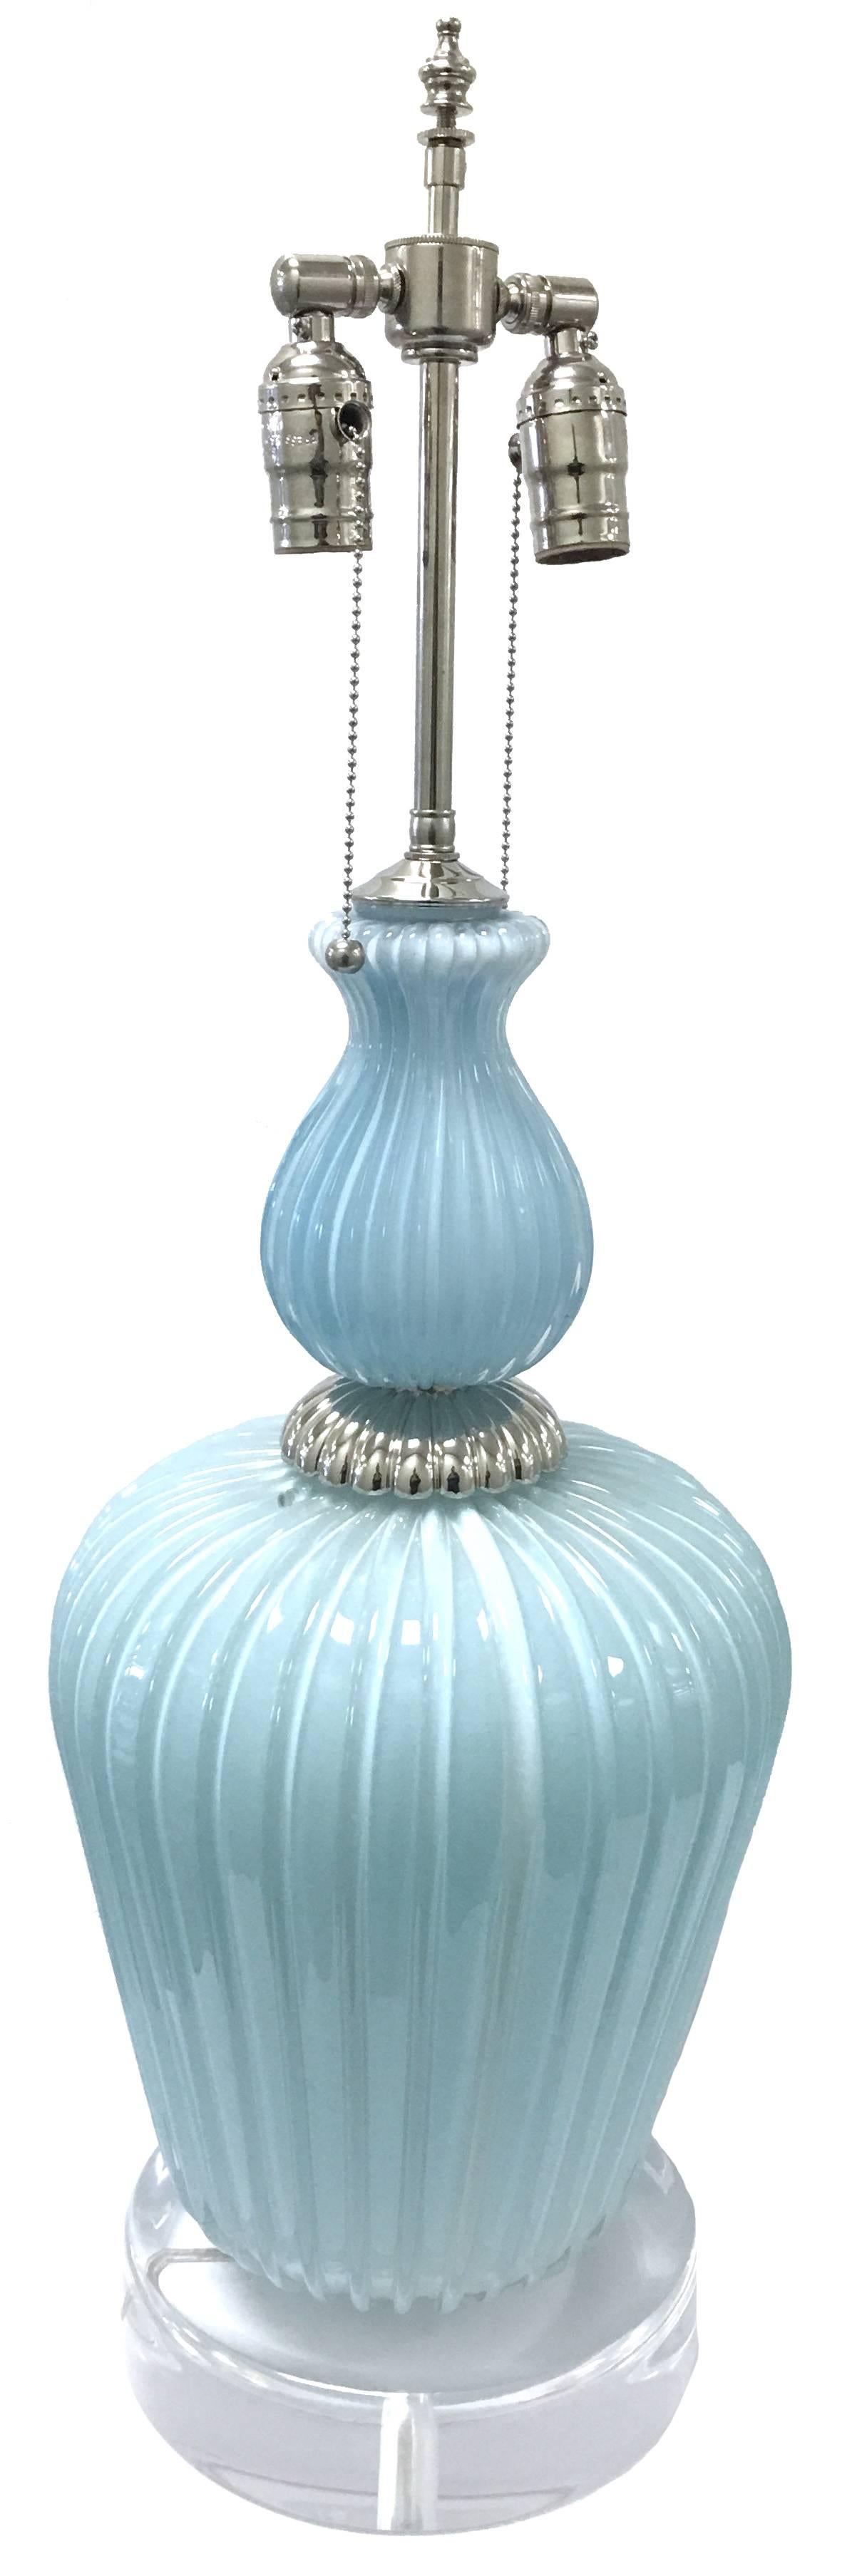 Single large Mid-Century Murano glass lamp by Barovier & Toso. Ribbed light blue glass. Top portion of glass is slightly darker than the bottom. Polished chrome centre medallion. Newly rewired. Takes two standard bulbs. New Lucite bases with